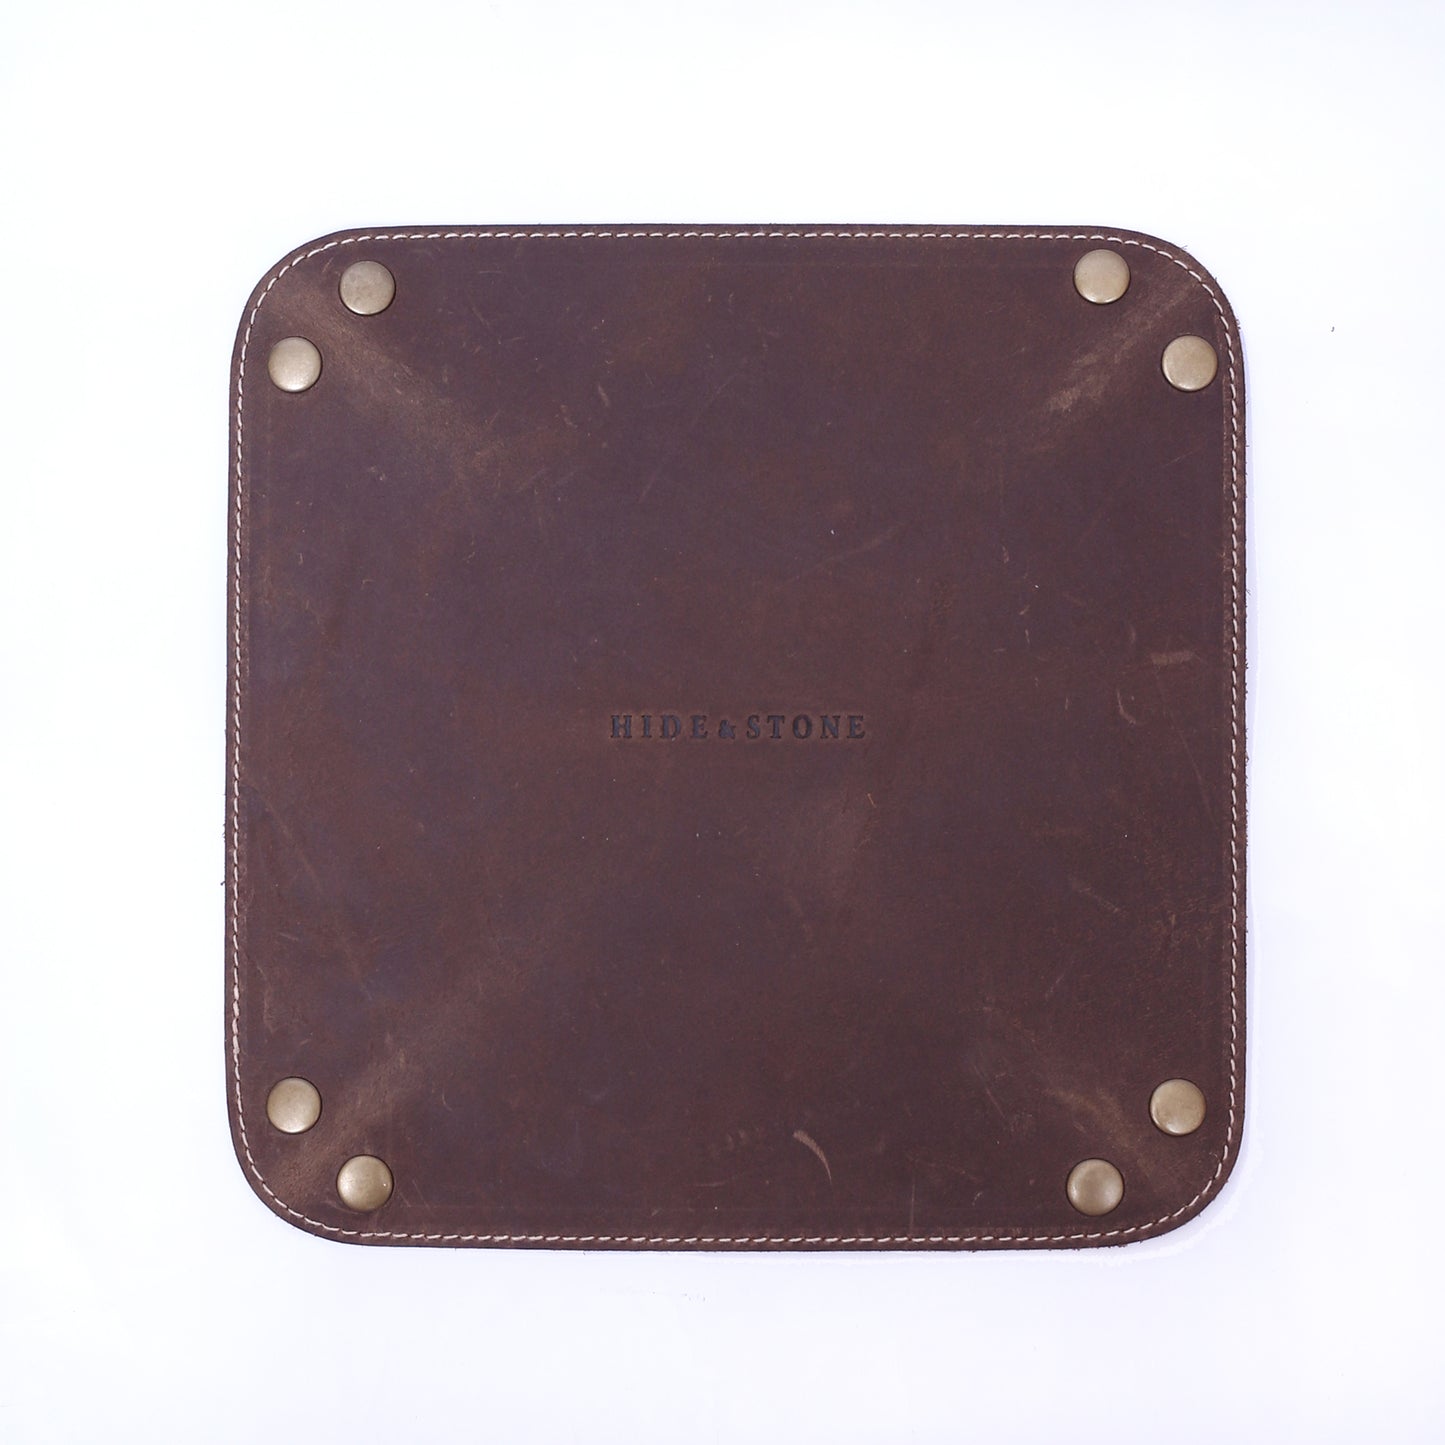 Leather Key & Watch Tray (Chocolate Brown)